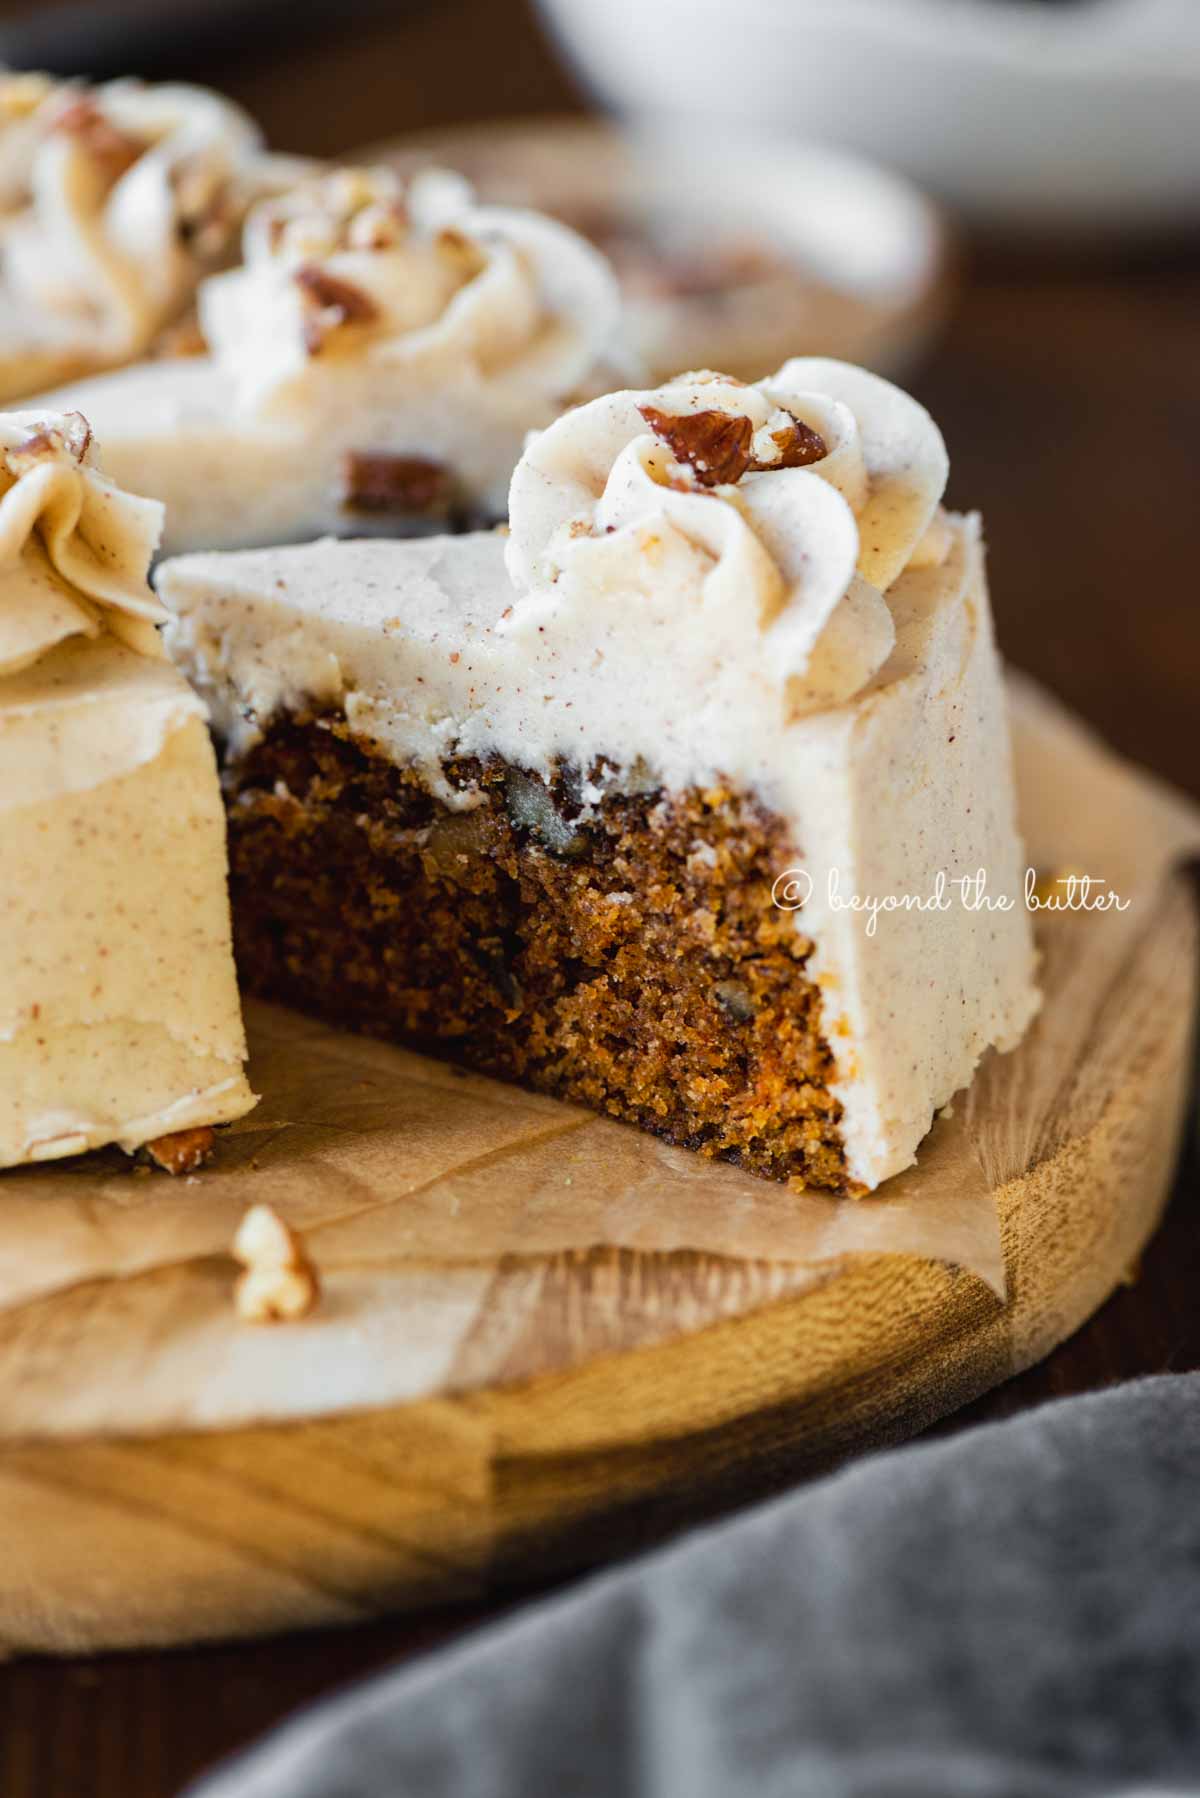 Angled closeup image of sliced 6 inch single layer carrot cake on parchment paper | All Images © Beyond the Butter®